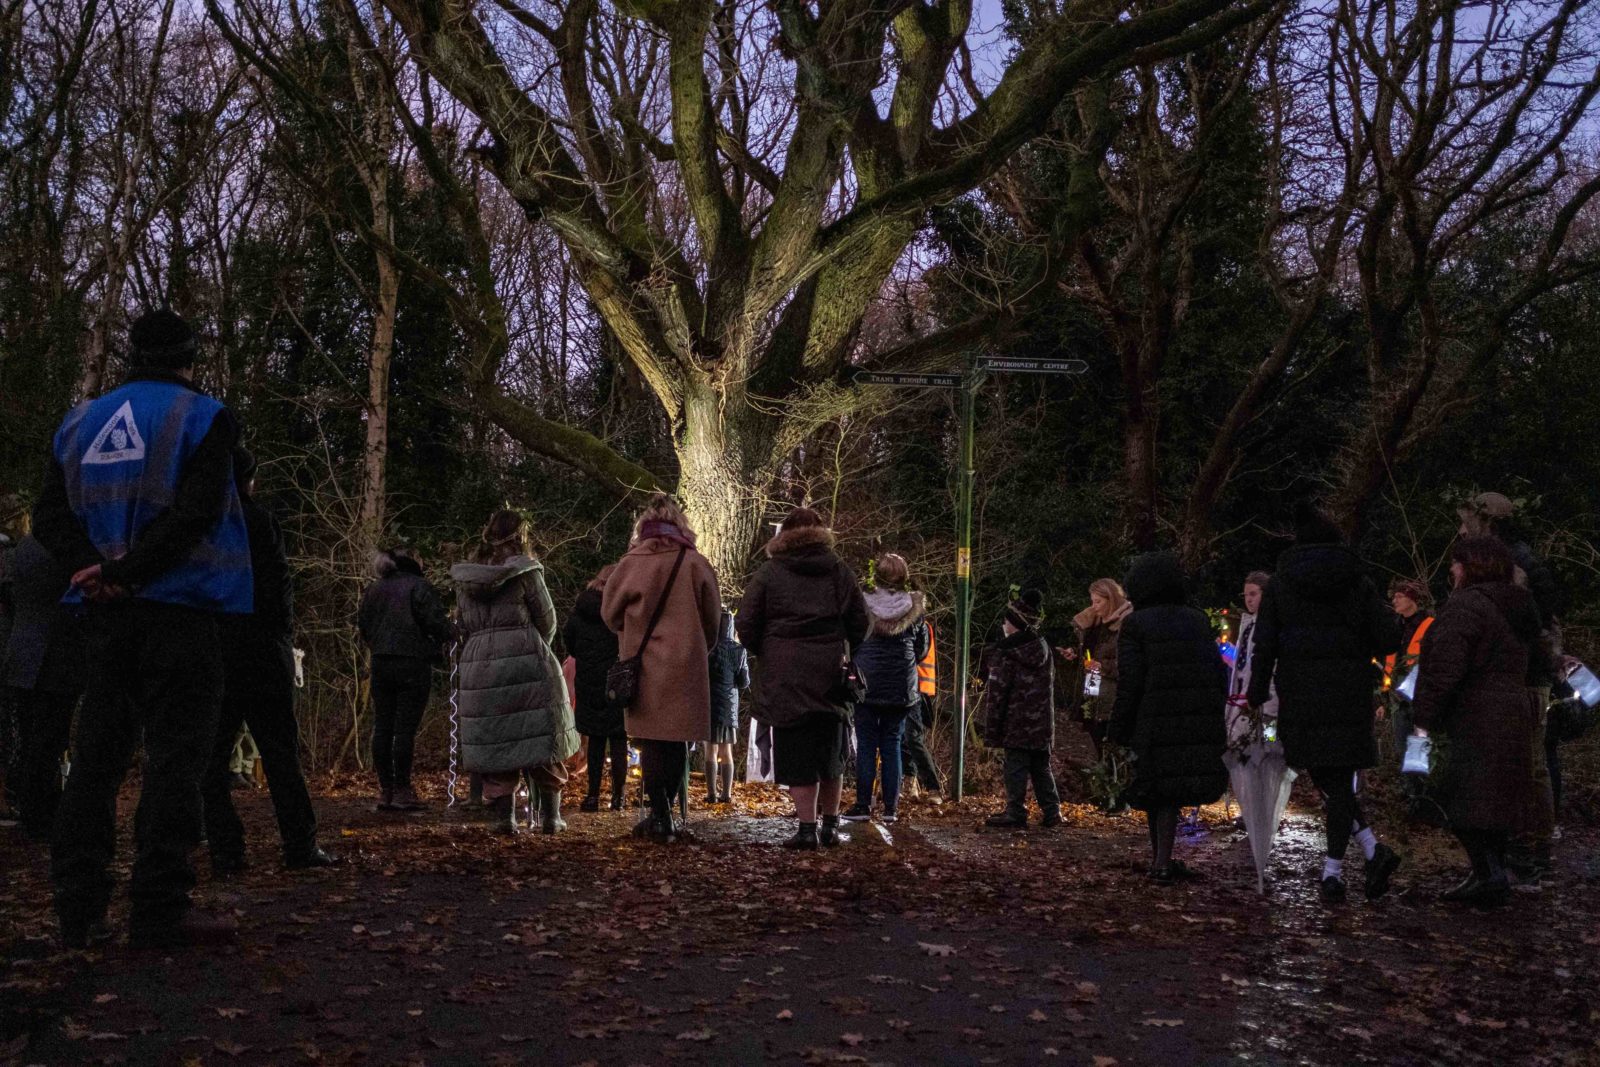 People stood around a tree, there is a warm light at the base of the tree.